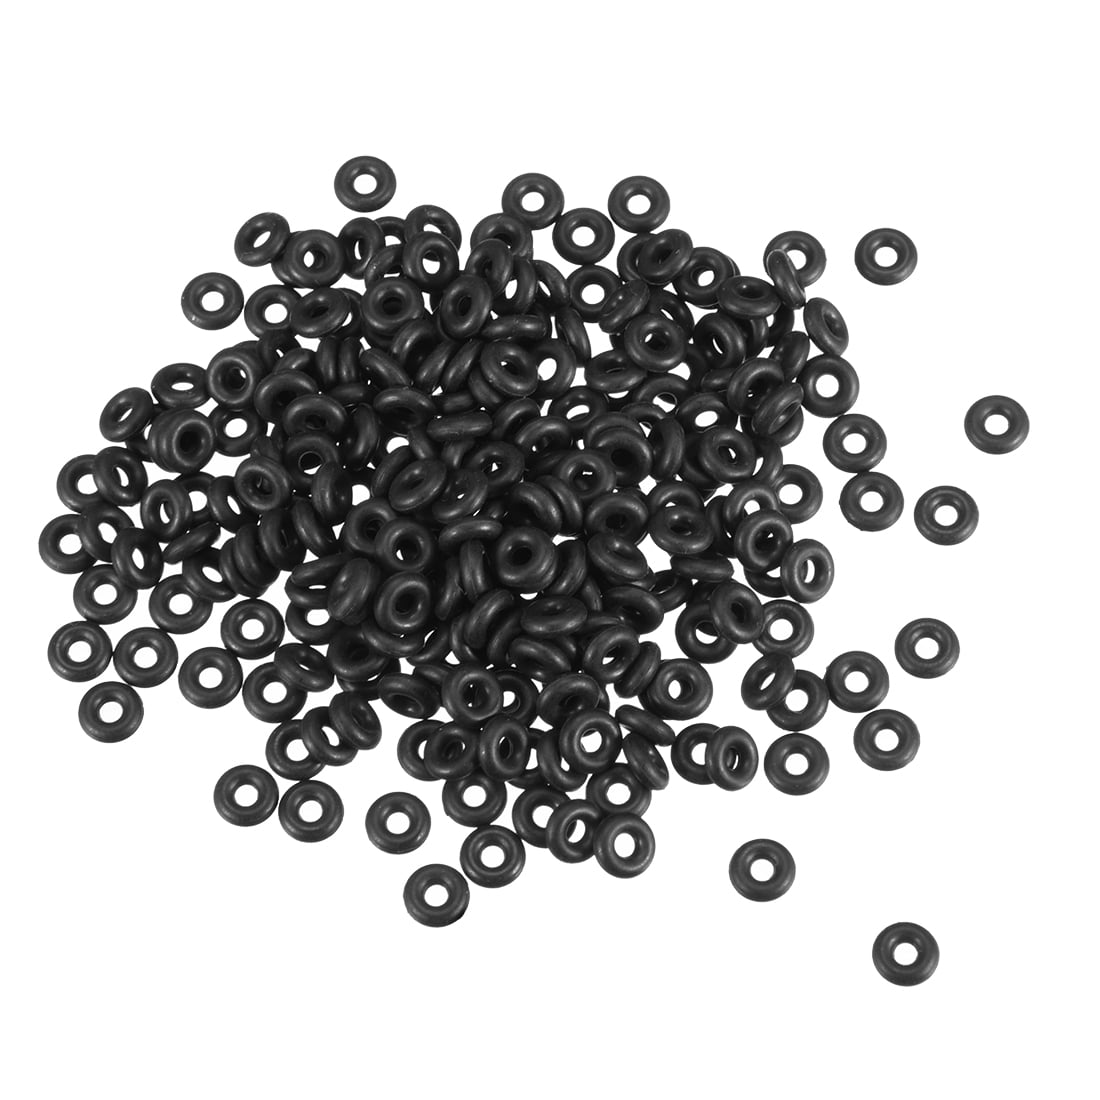 3mm Inner Diameter Nitrile Rubber 70A Shore Metric Seals Packets ID O-Rings 